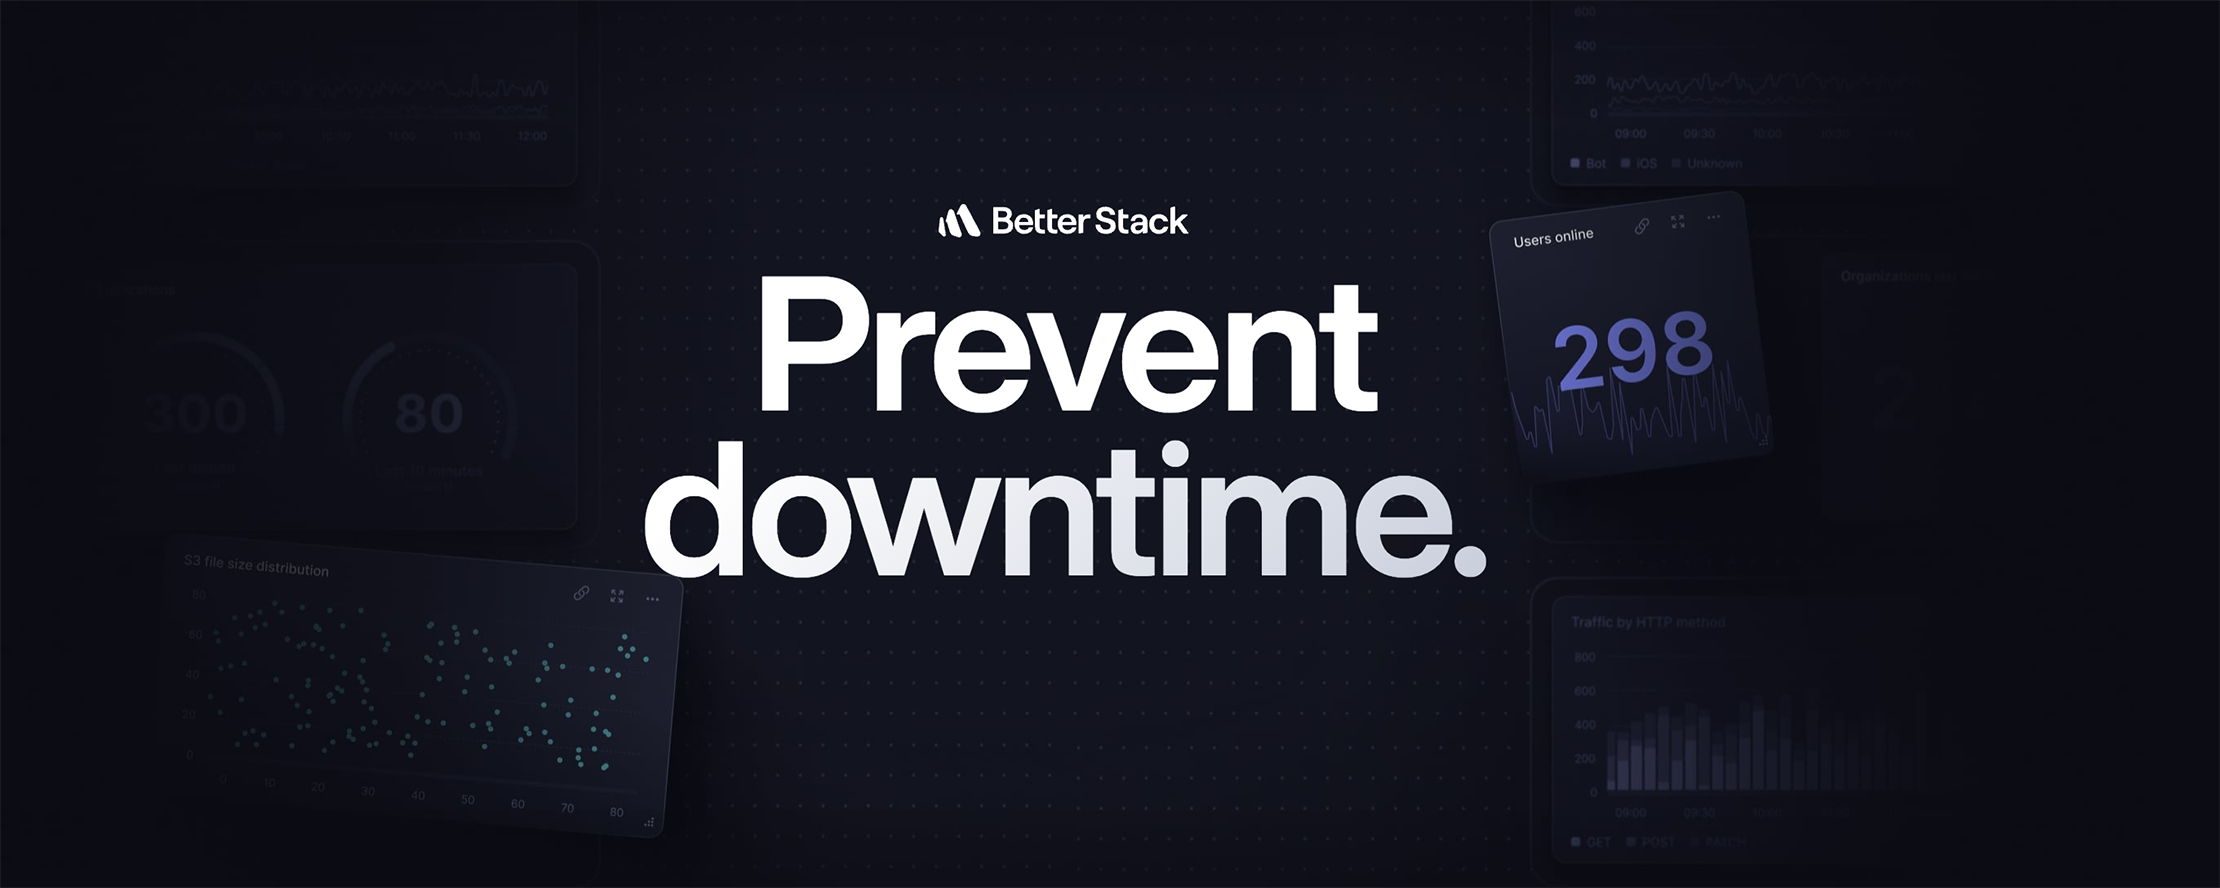 Top 7 Better Stack Alternatives You Should Check Out